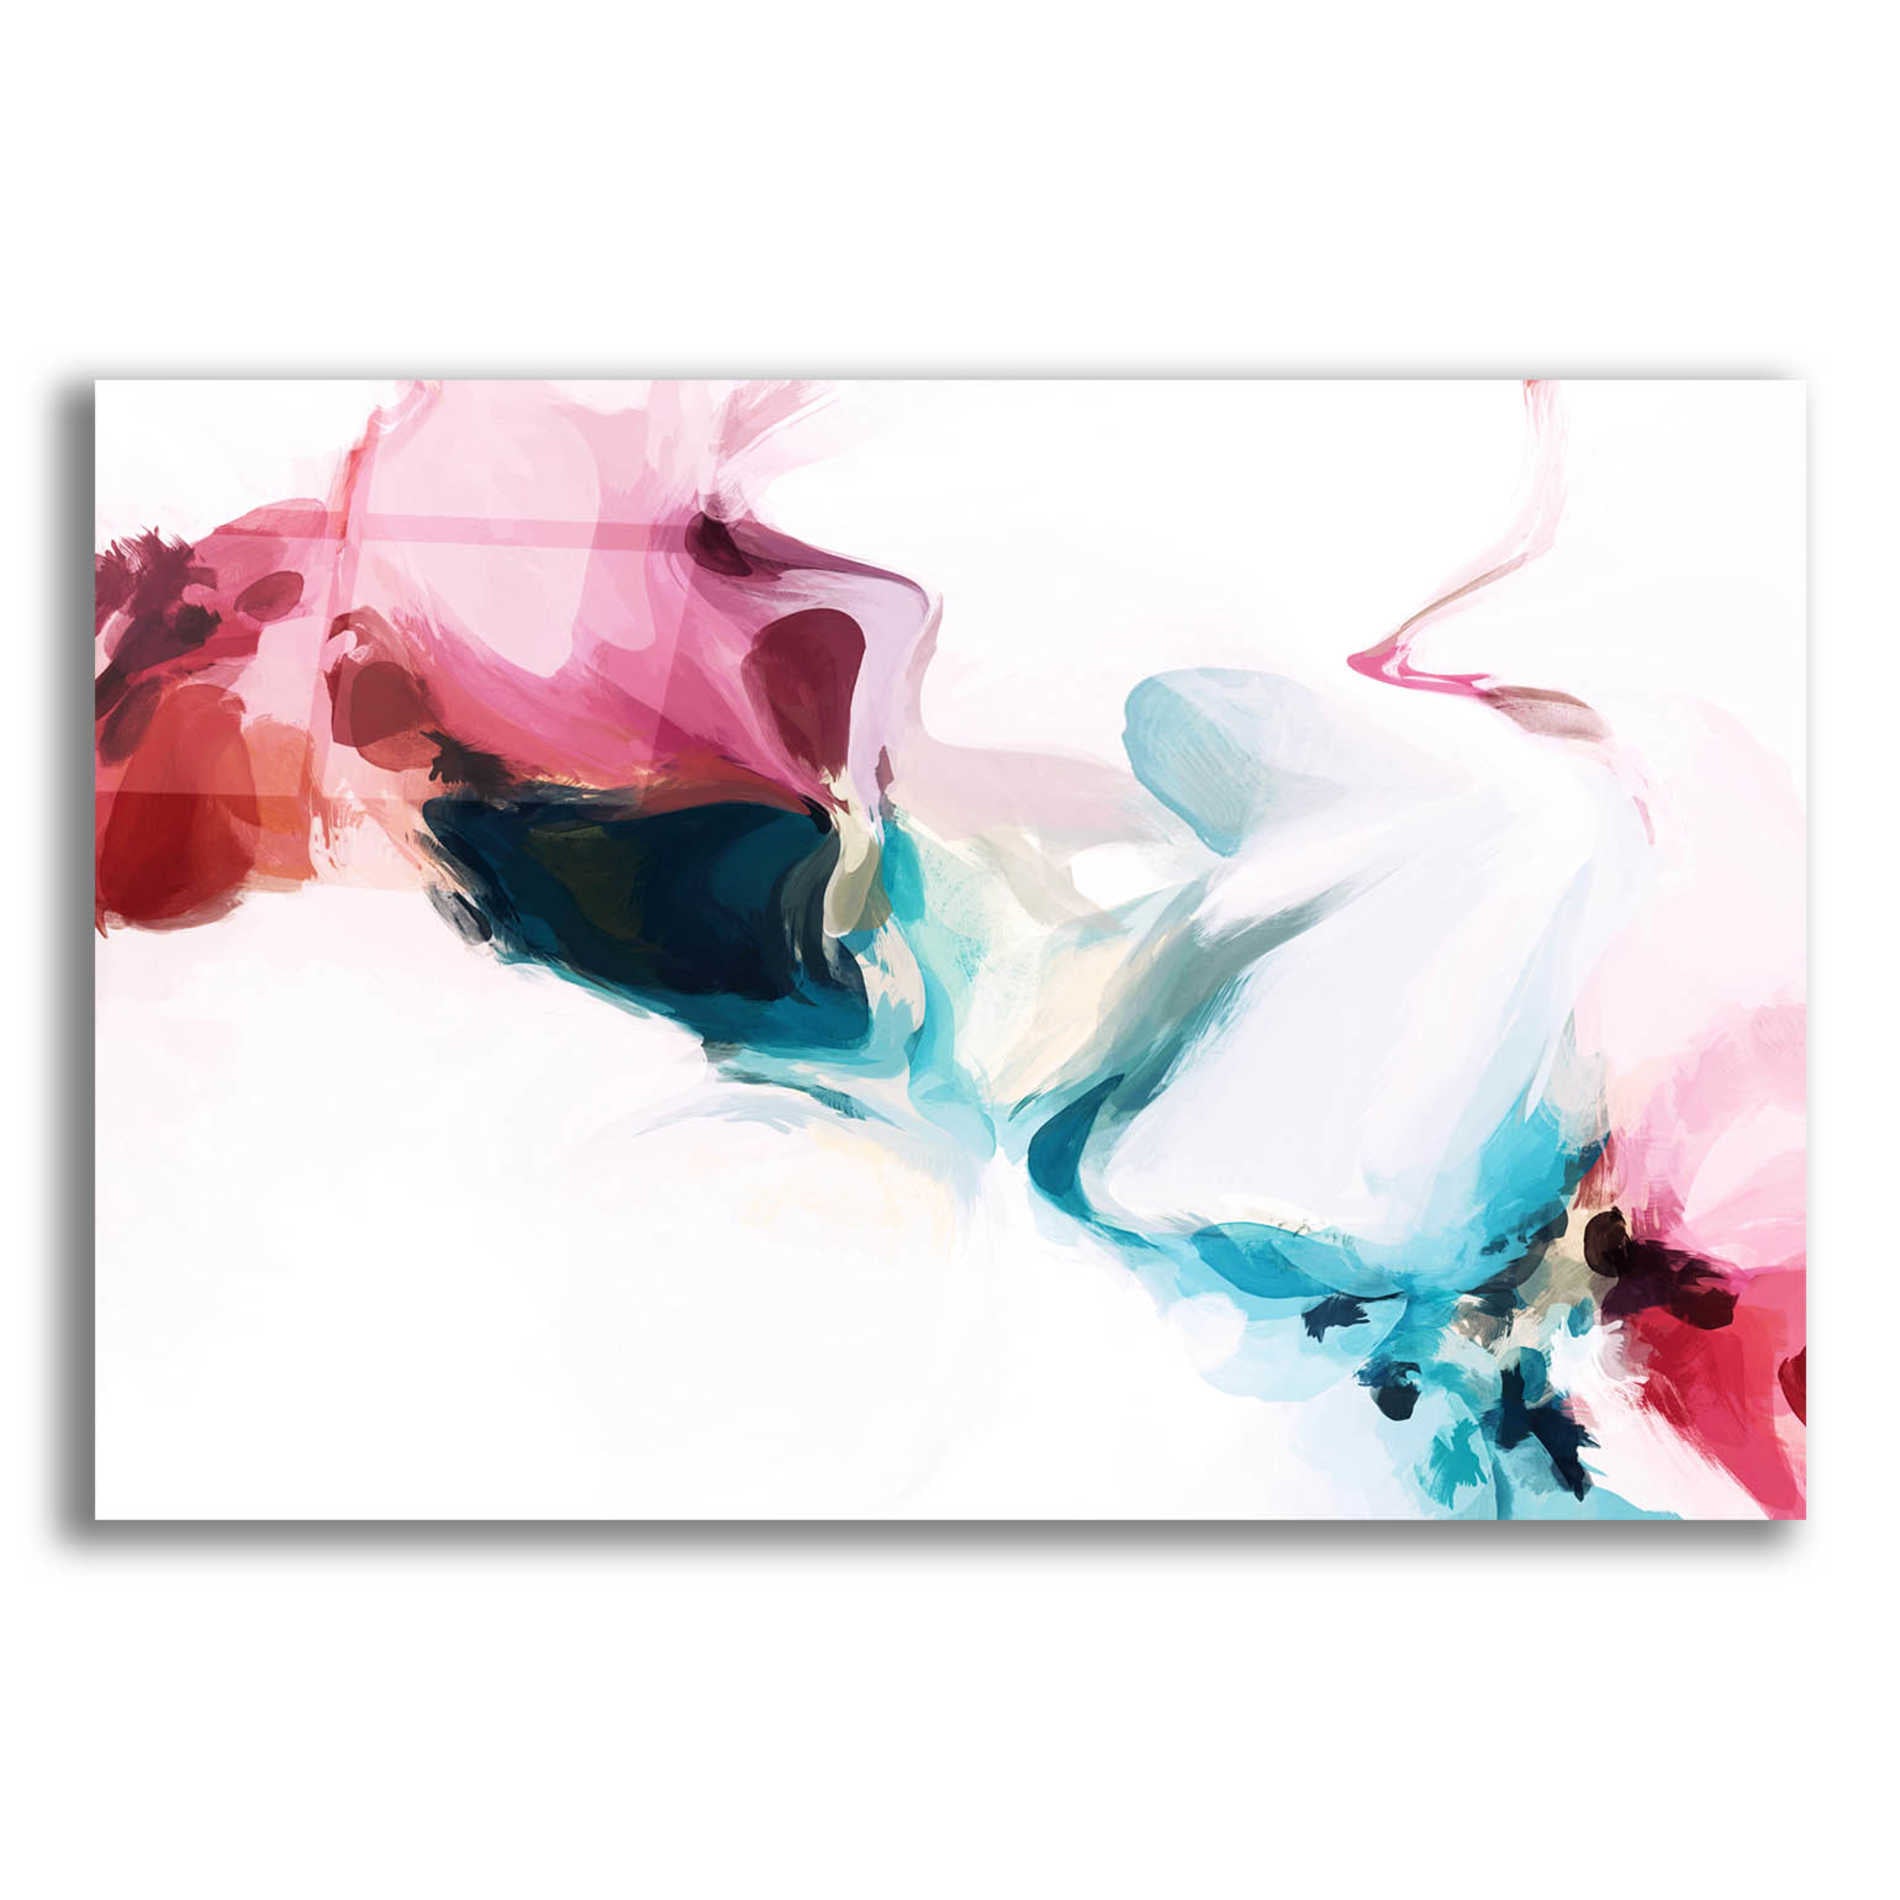 Epic Art 'Abstract Colorful Flows 18' by Irena Orlov Acrylic Glass Wall Art